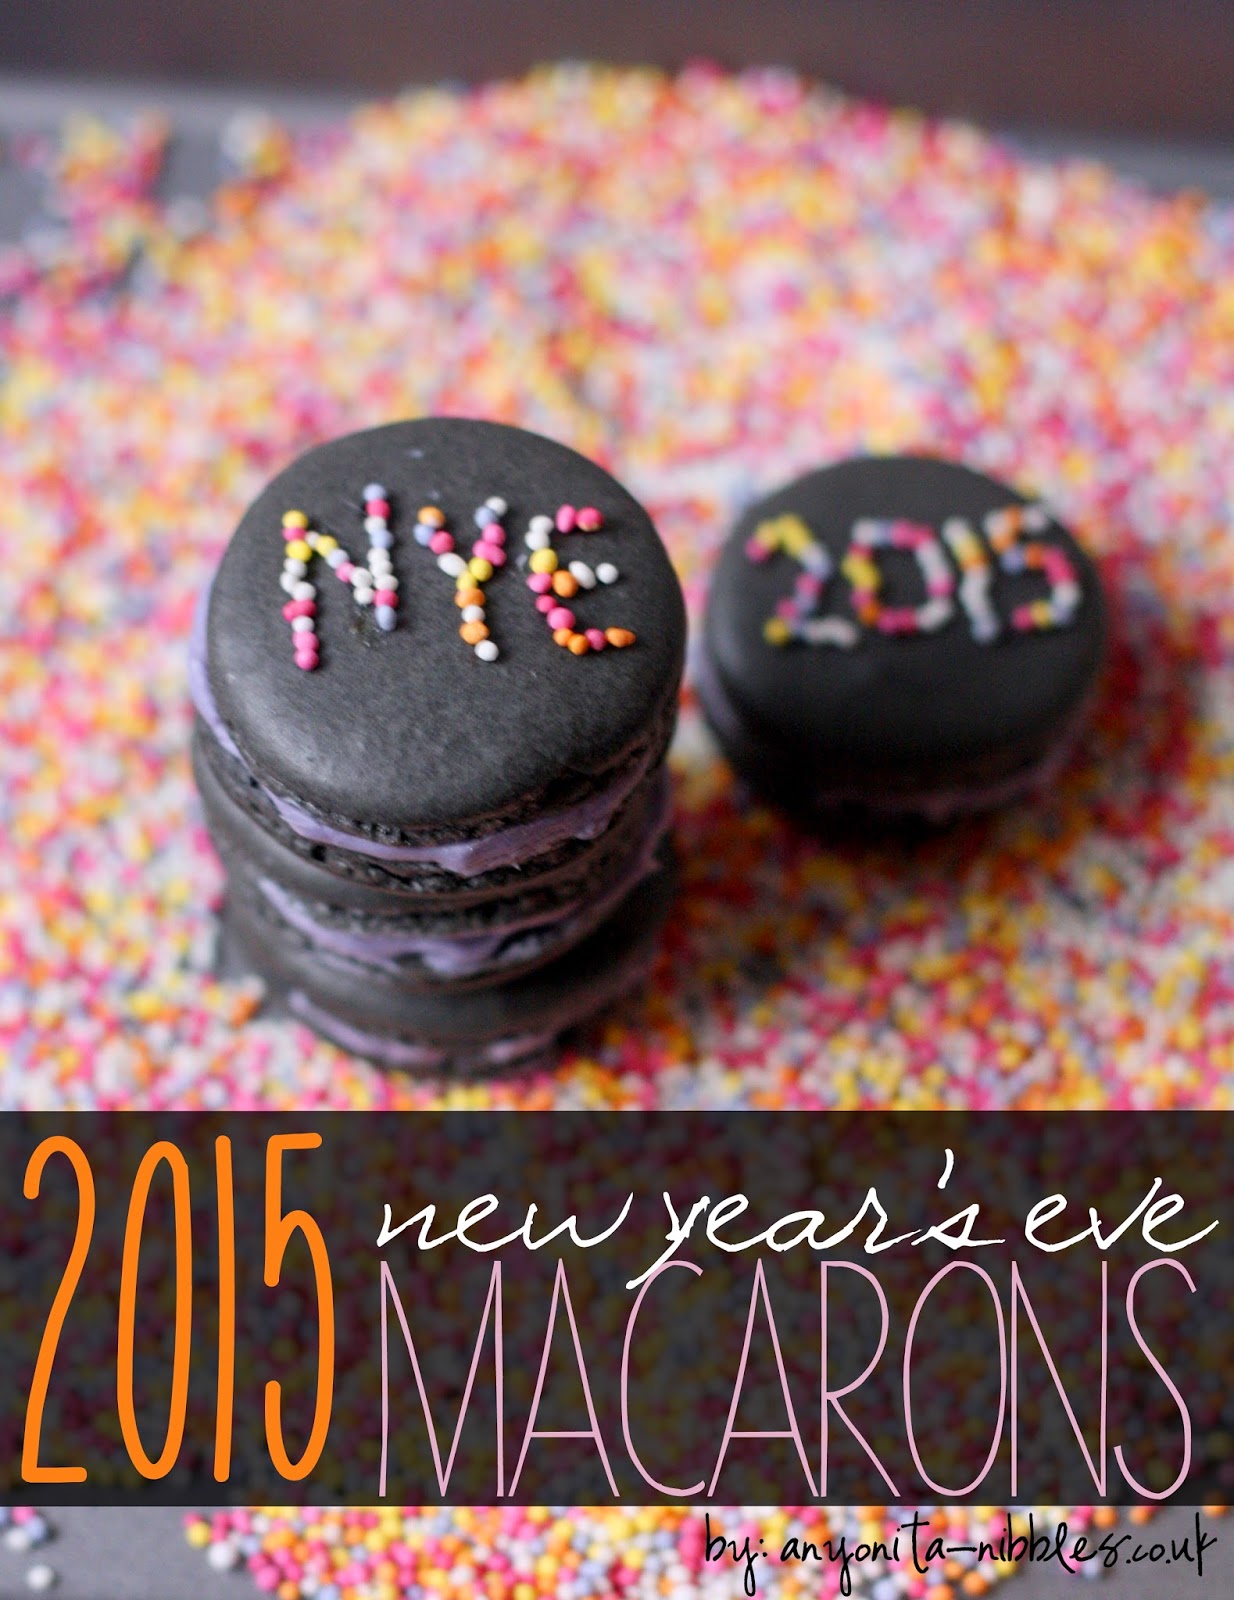 2015 New Year's Eve Macarons from Anyonita-nibbles.co.uk